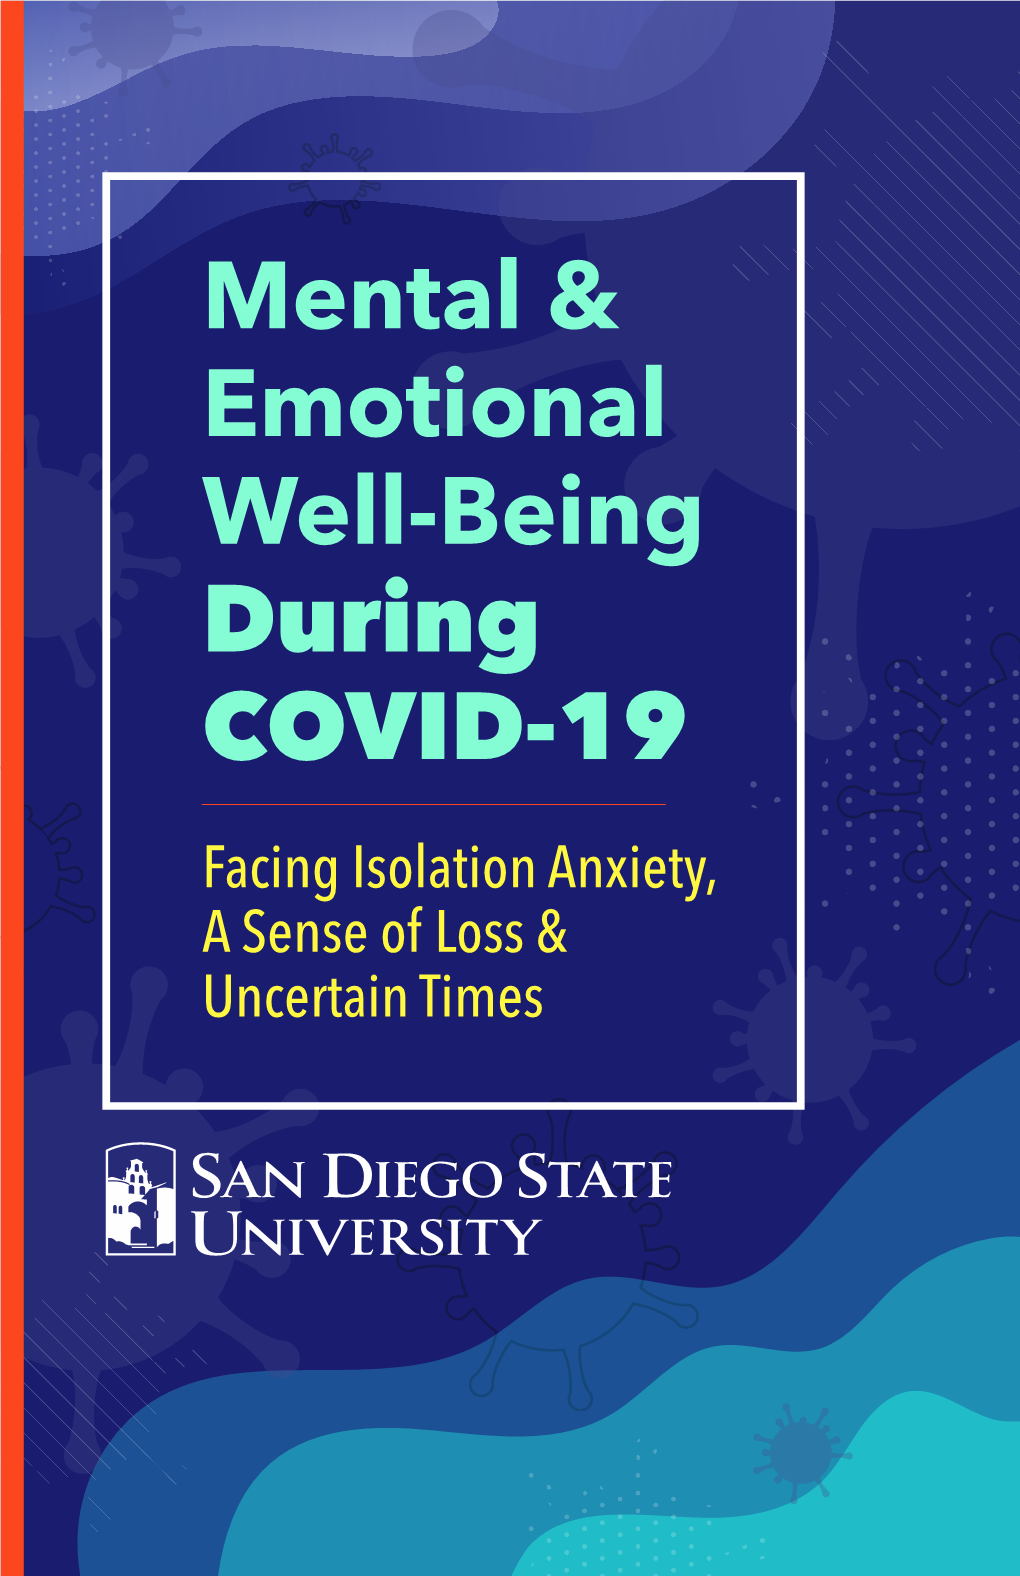 Mental Health & Emotional Well-Being During COVID-19